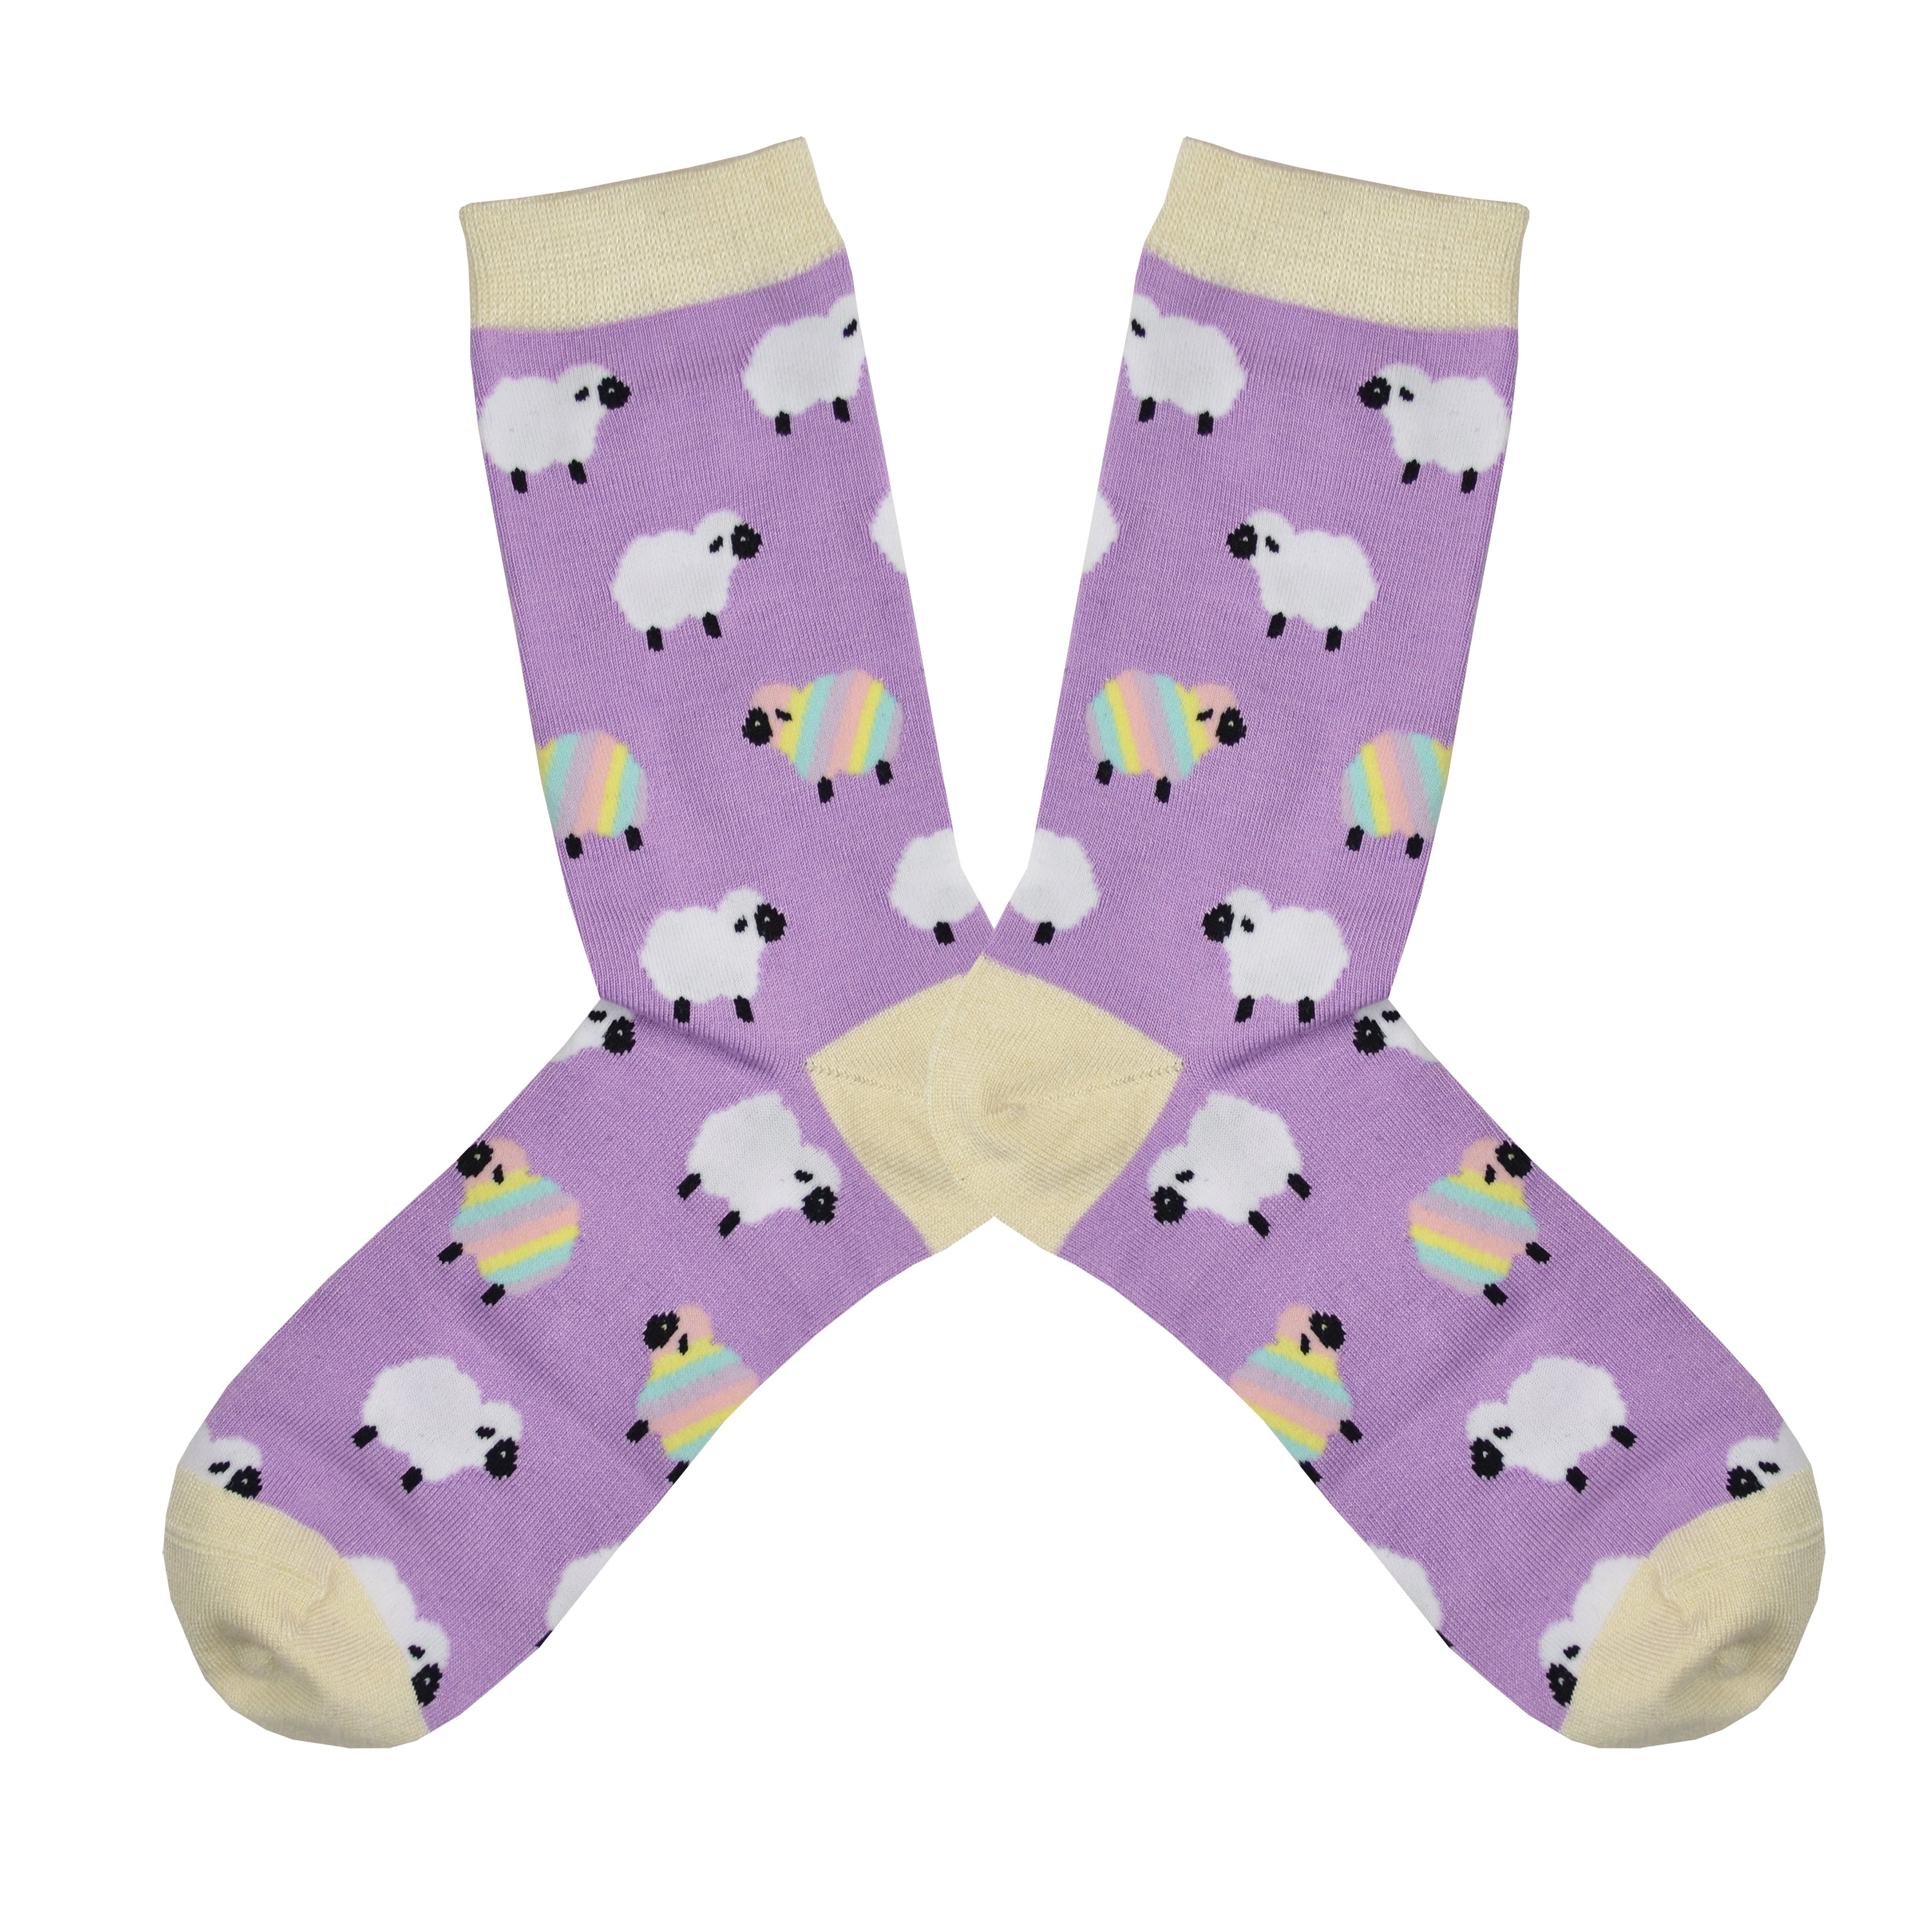 Shown in a flatlay, a pair of Socksmith brand women's bamboo crew socks in lilac with a cream toe, heel, and cuff. This sock features an all over motif of white fluffy sheep with a few pastel rainbow sheep mixed in.